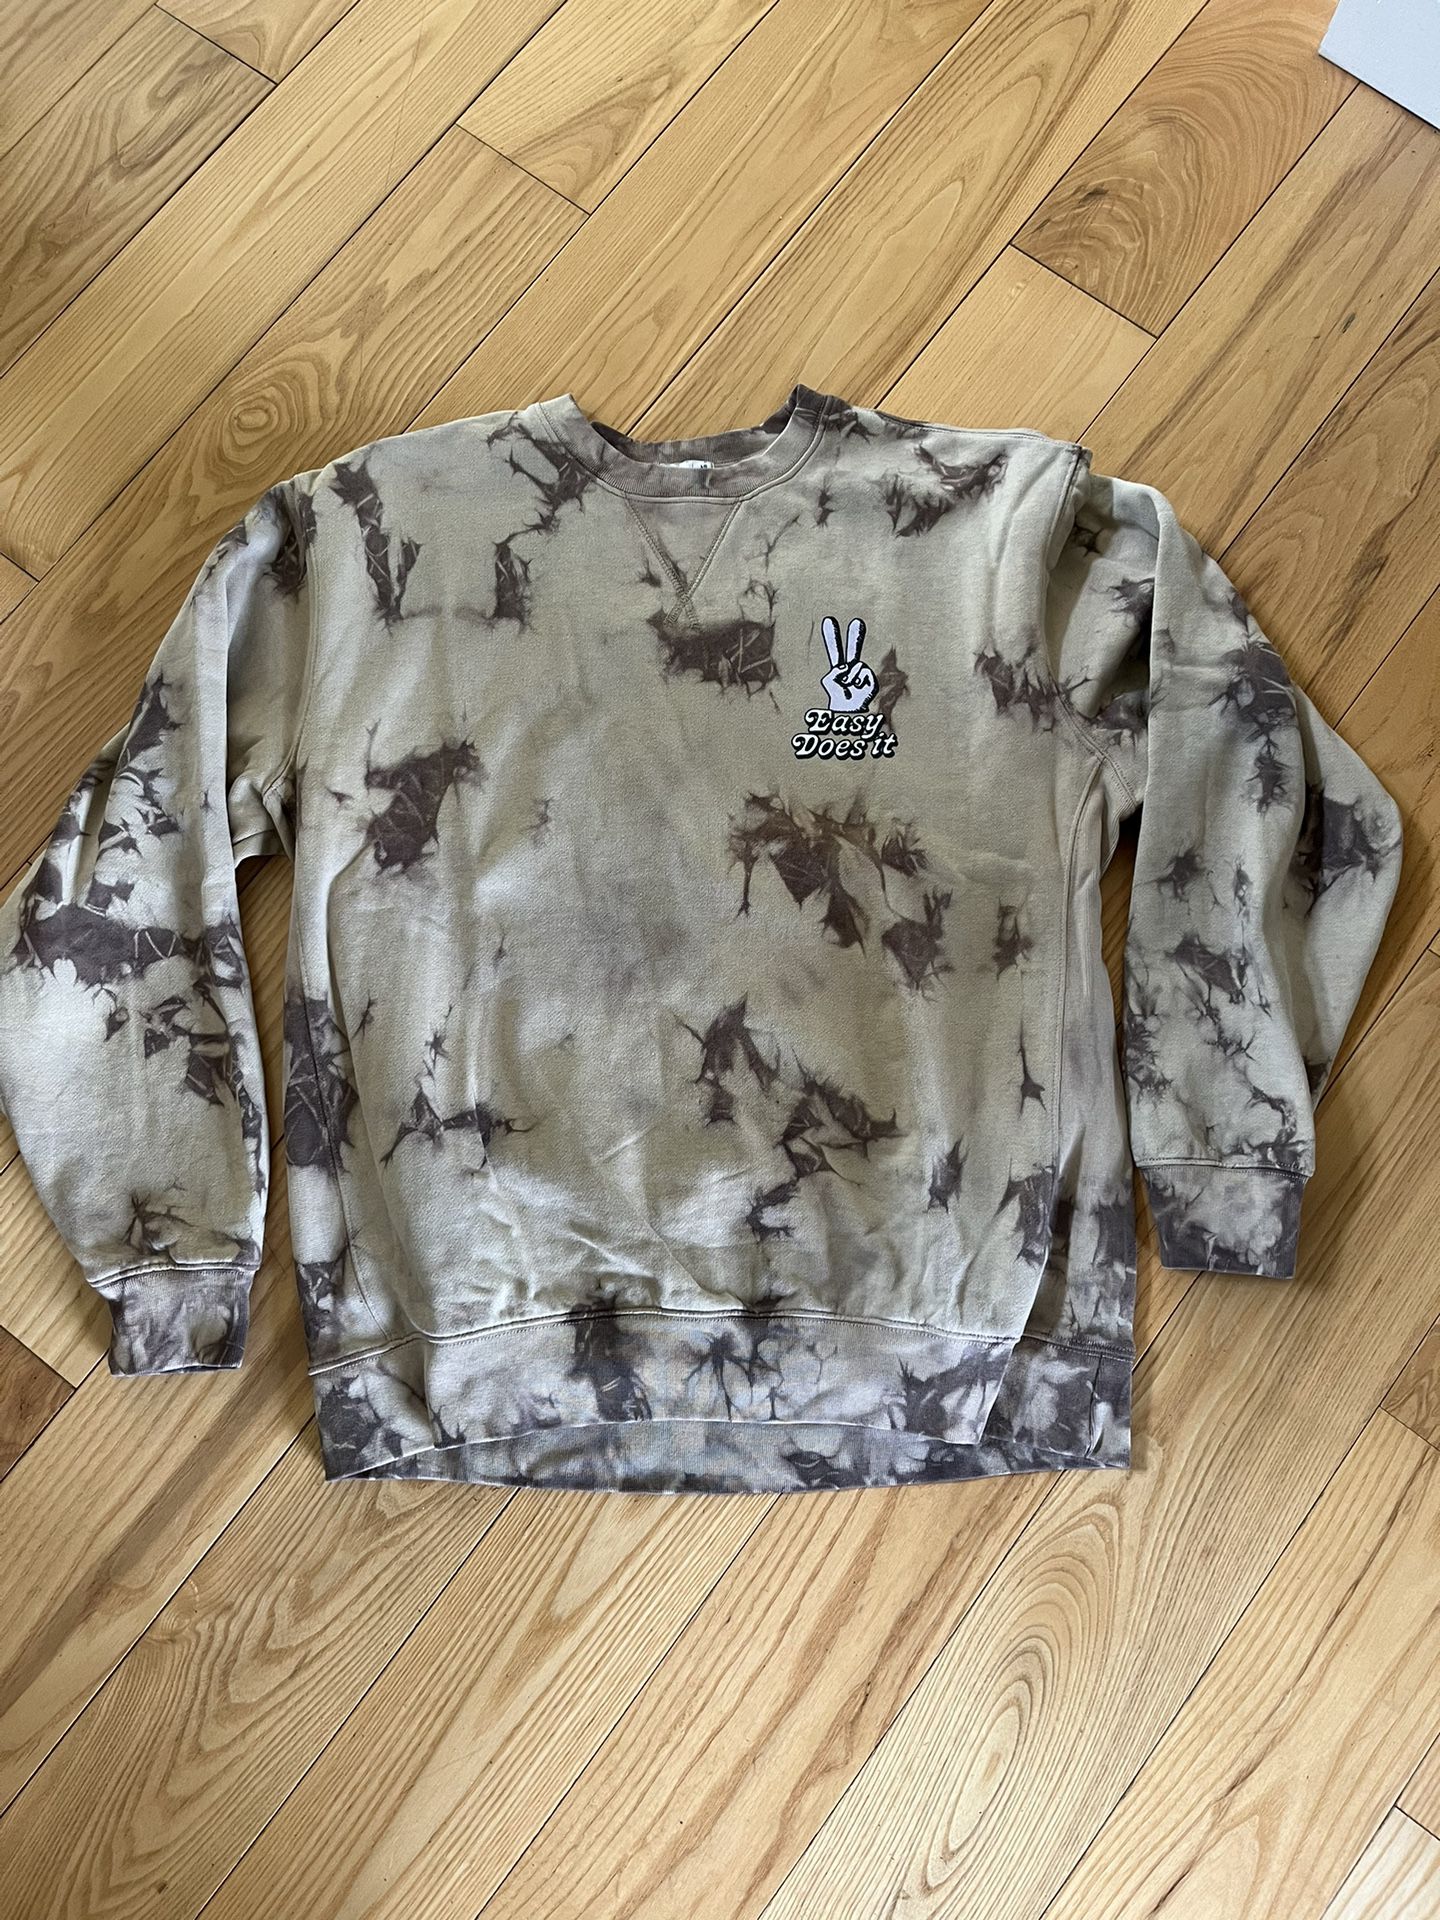 Katin Men’s Crew Sweatshirt. Easy Does It. Size Large. Carried At Urban Outfitters 